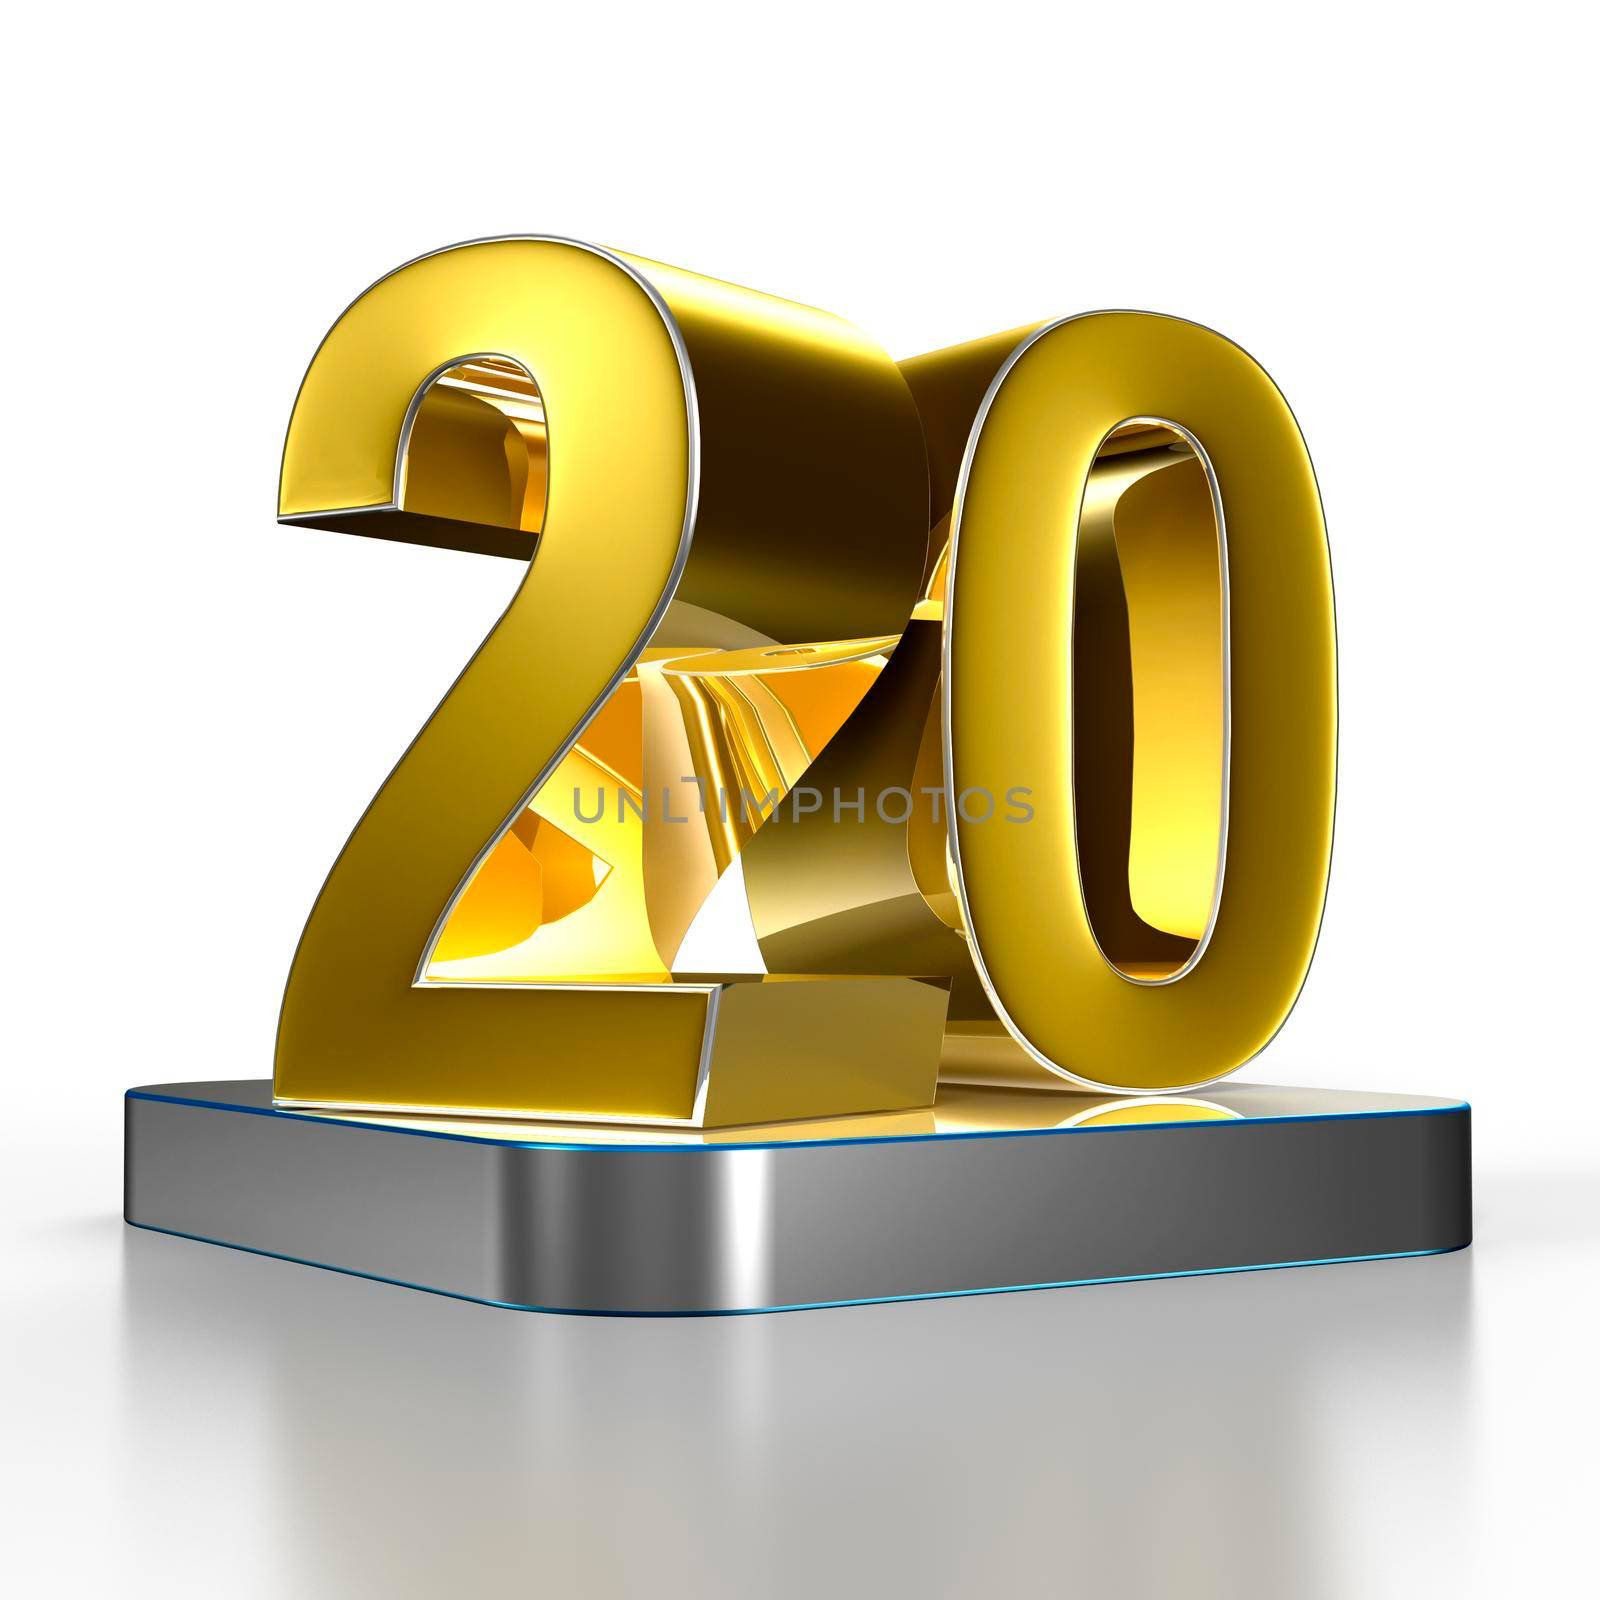 Numbers 20 gold are on a stainless steel platform illustration 3D rendering with clipping path.